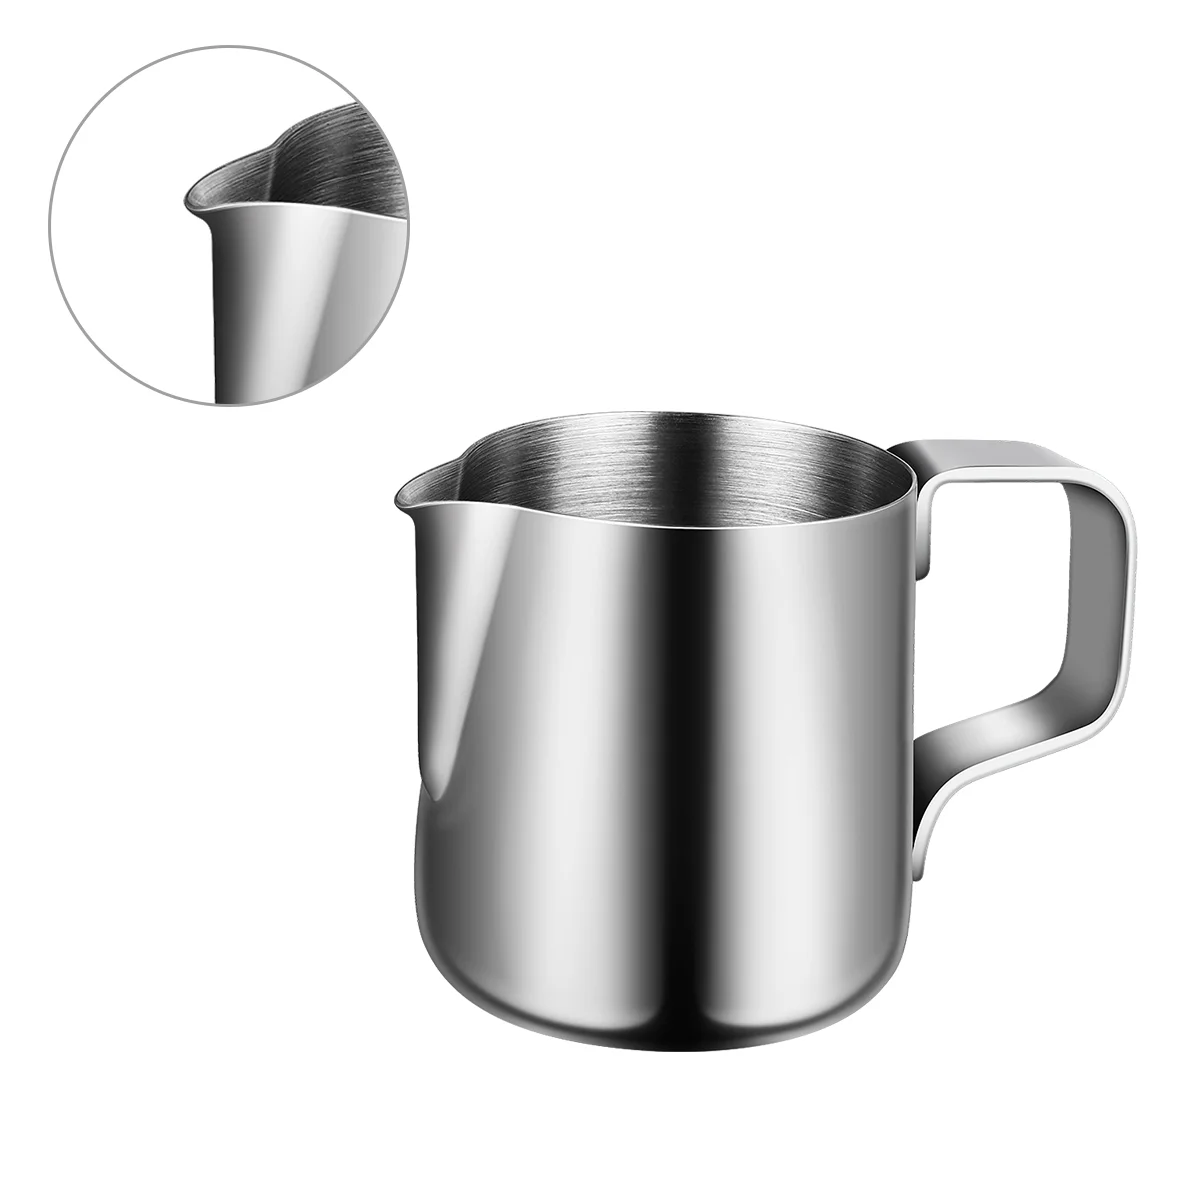 

Milk Pitcher Cup Frother Jug Steaming Frothing Metal Accessories Machine Espresso Stainless Steel Art Latte Cappuccino Creamer